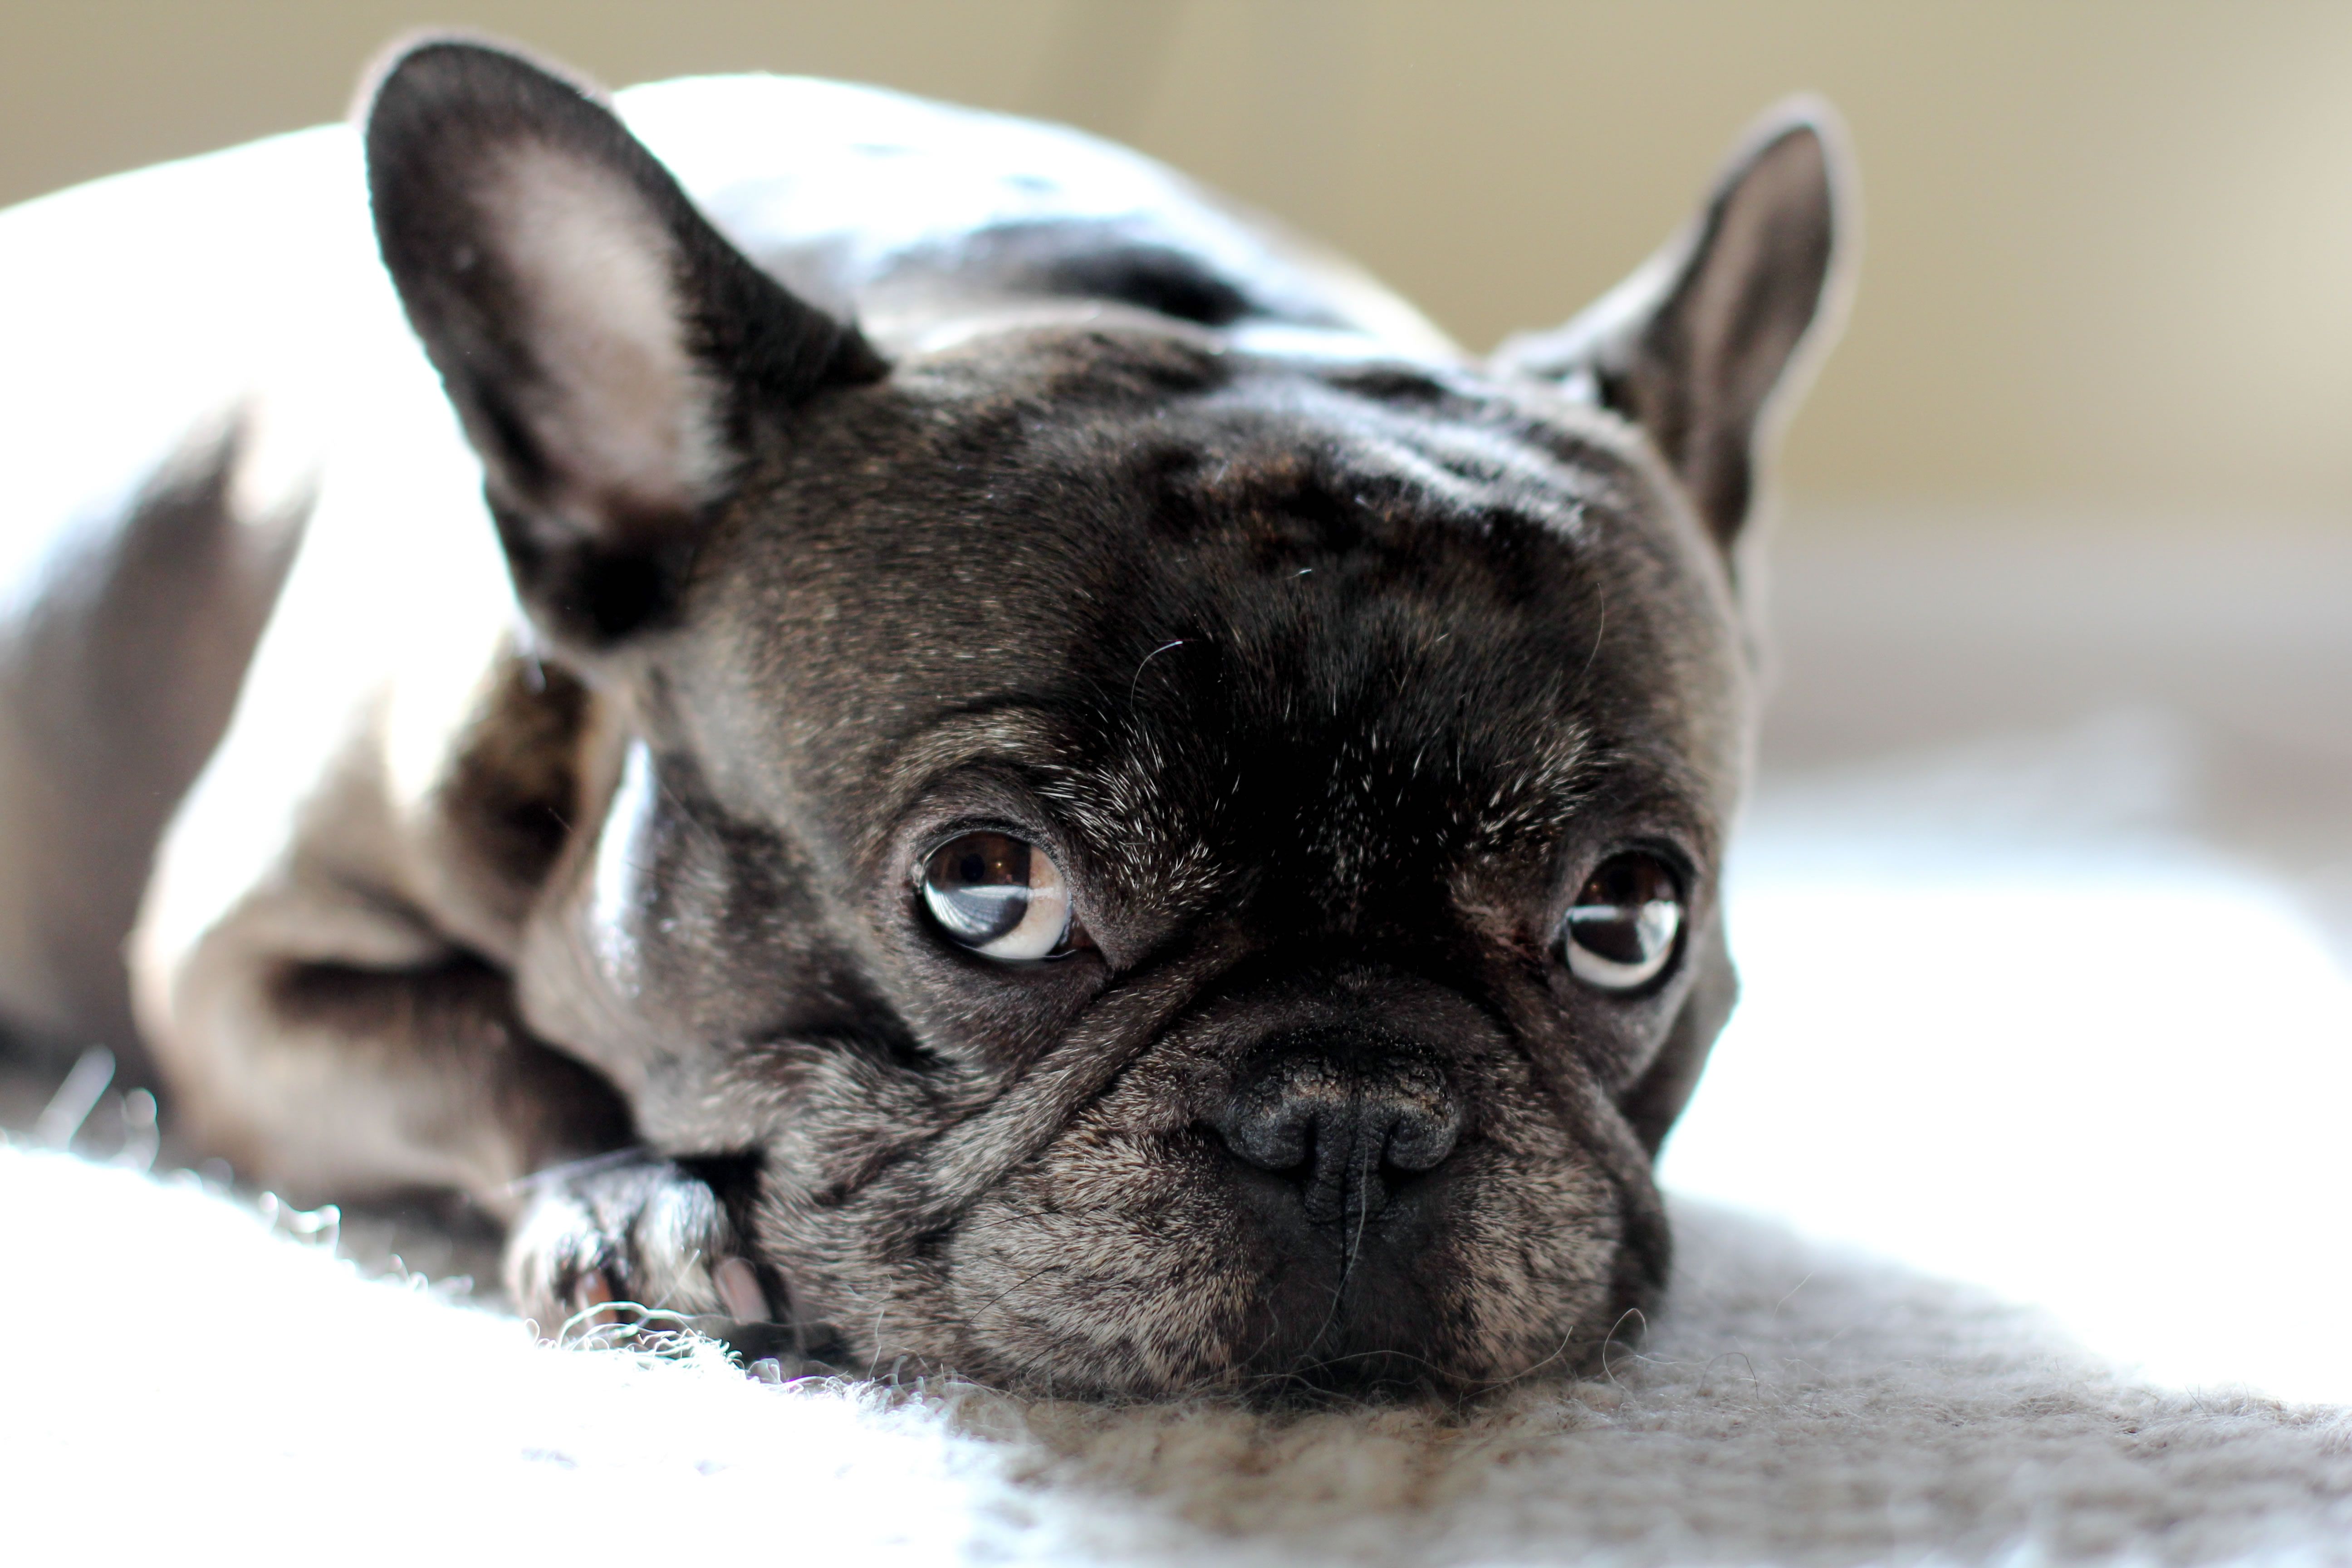 Aesthetic French Bulldog Wallpapers - Wallpaper Cave